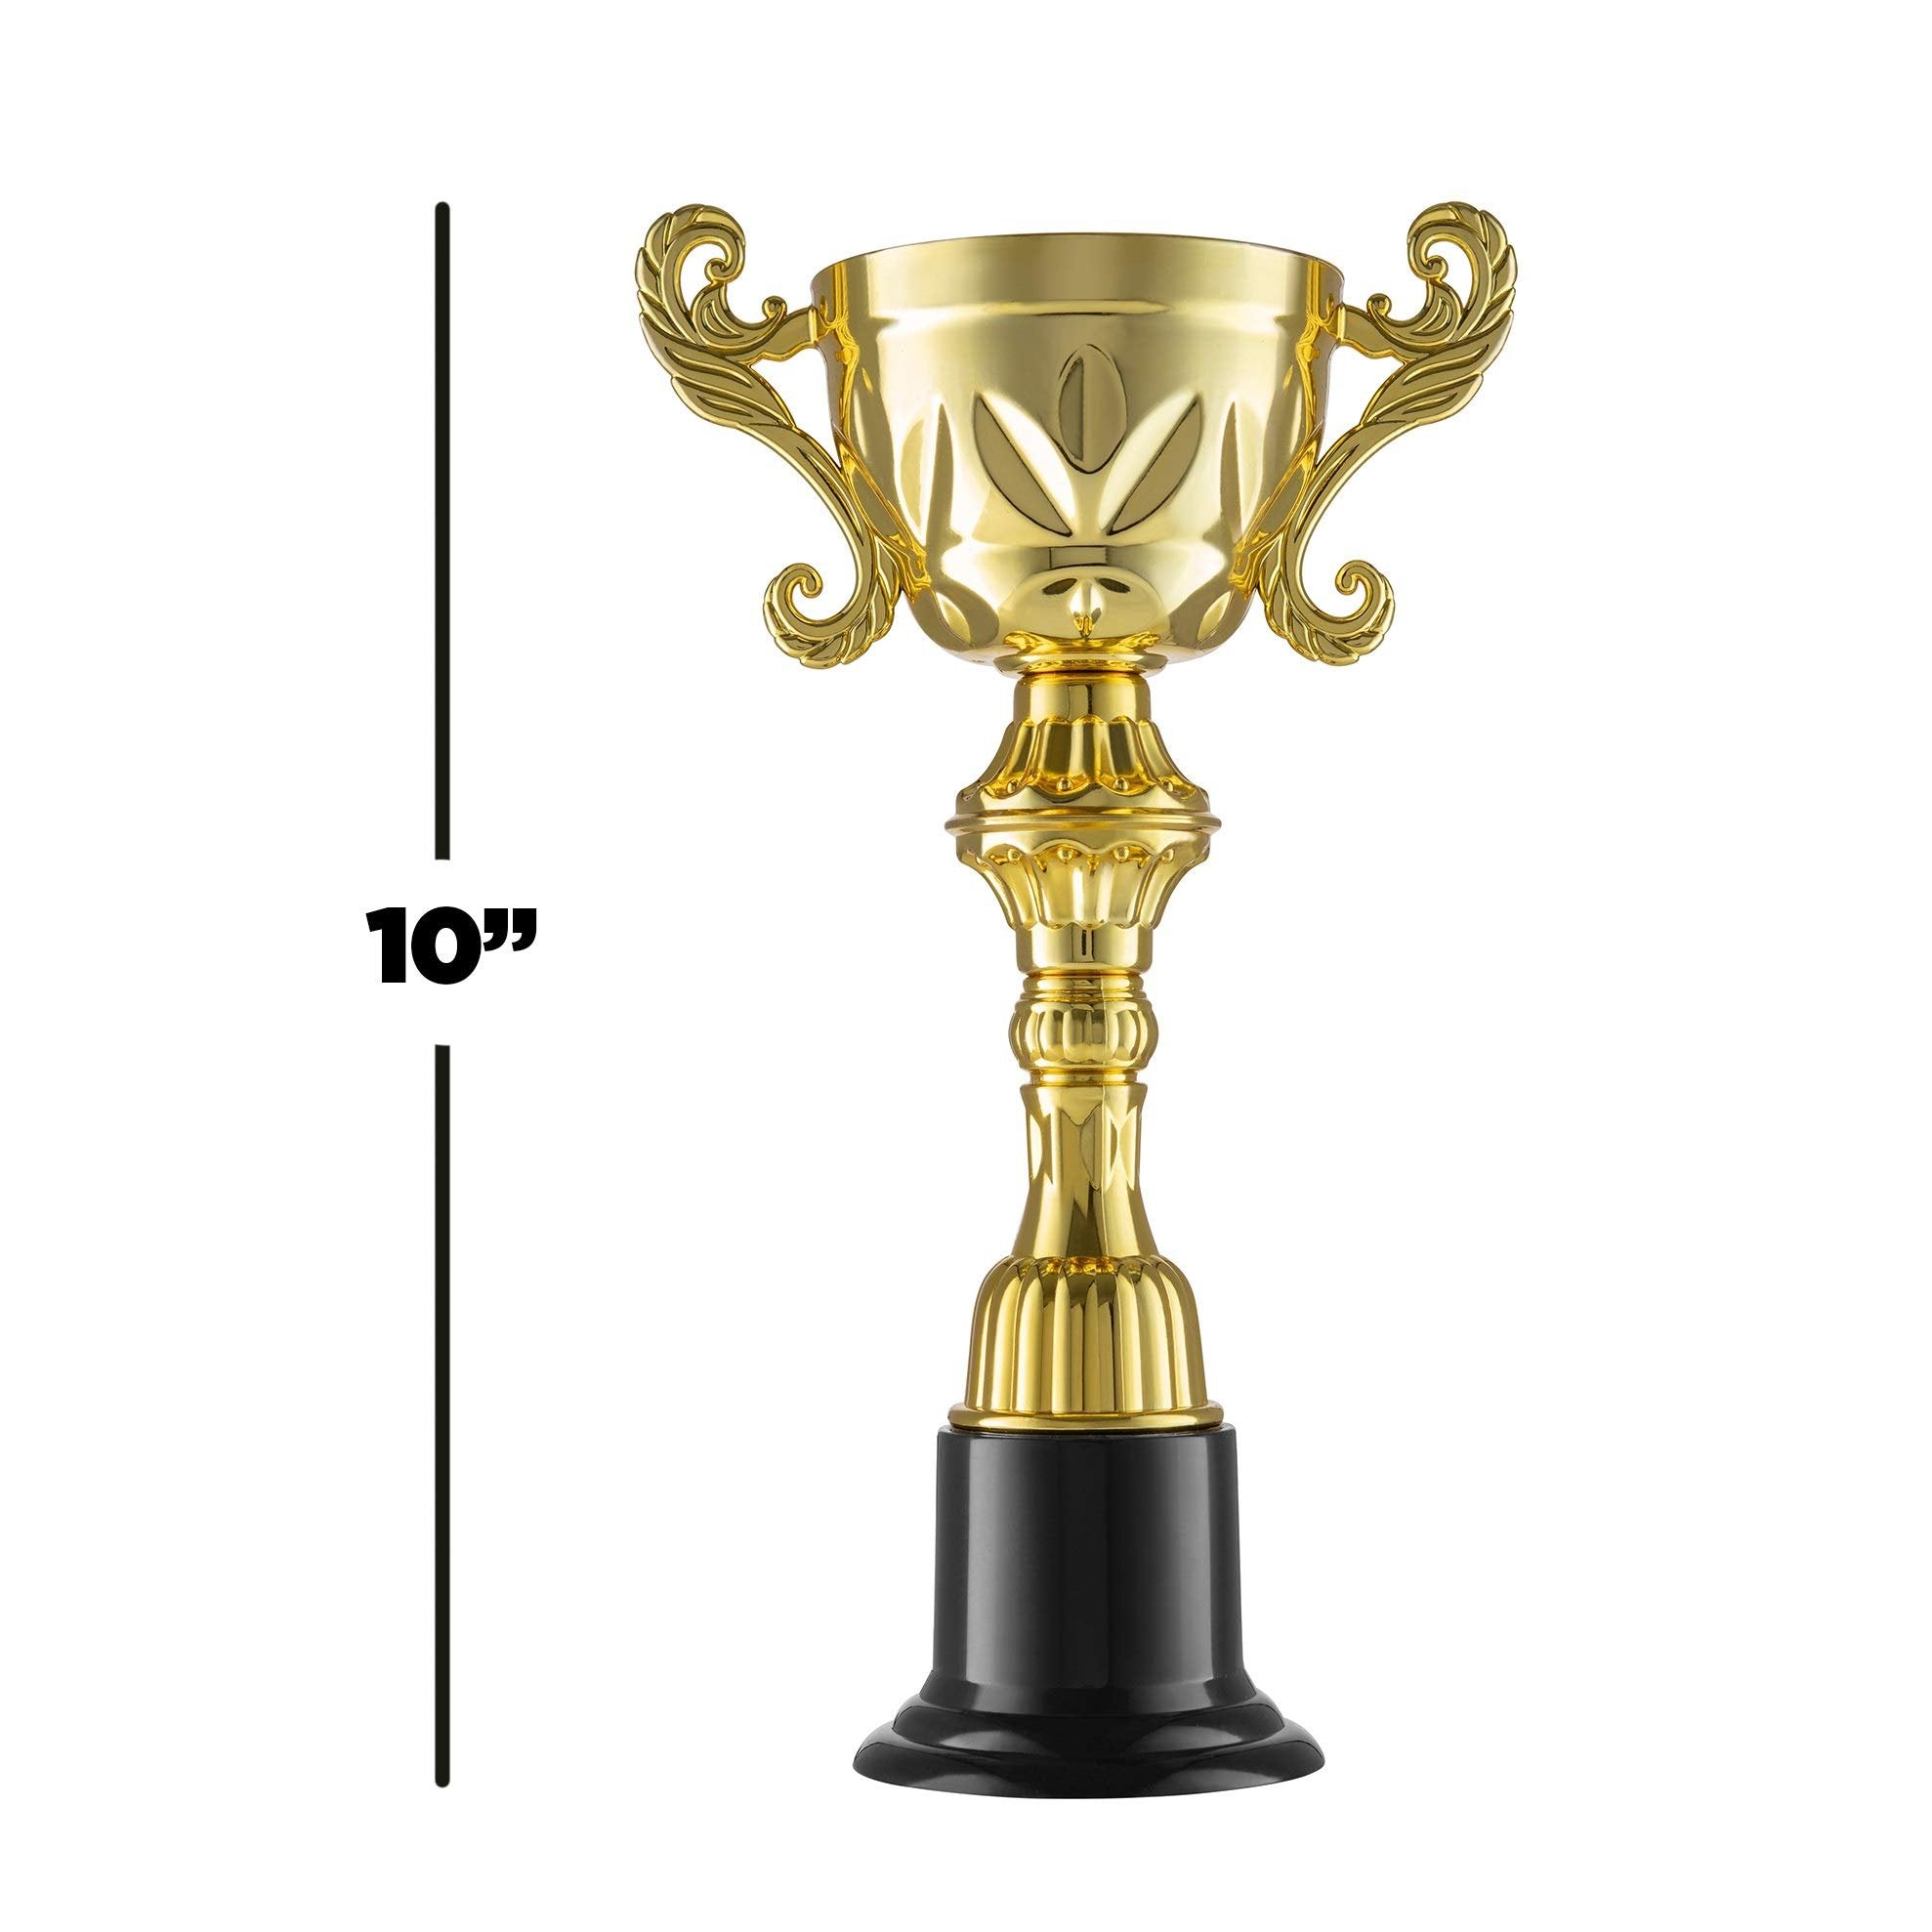 PREXTEX 2pc Golden Statues Trophy Award - Awards and Trophies for Party Celebrations, Award Ceremonies, and Appreciation Gifts - Ideal for Competitions, Rewards, and Party Favors for Kids & Adults